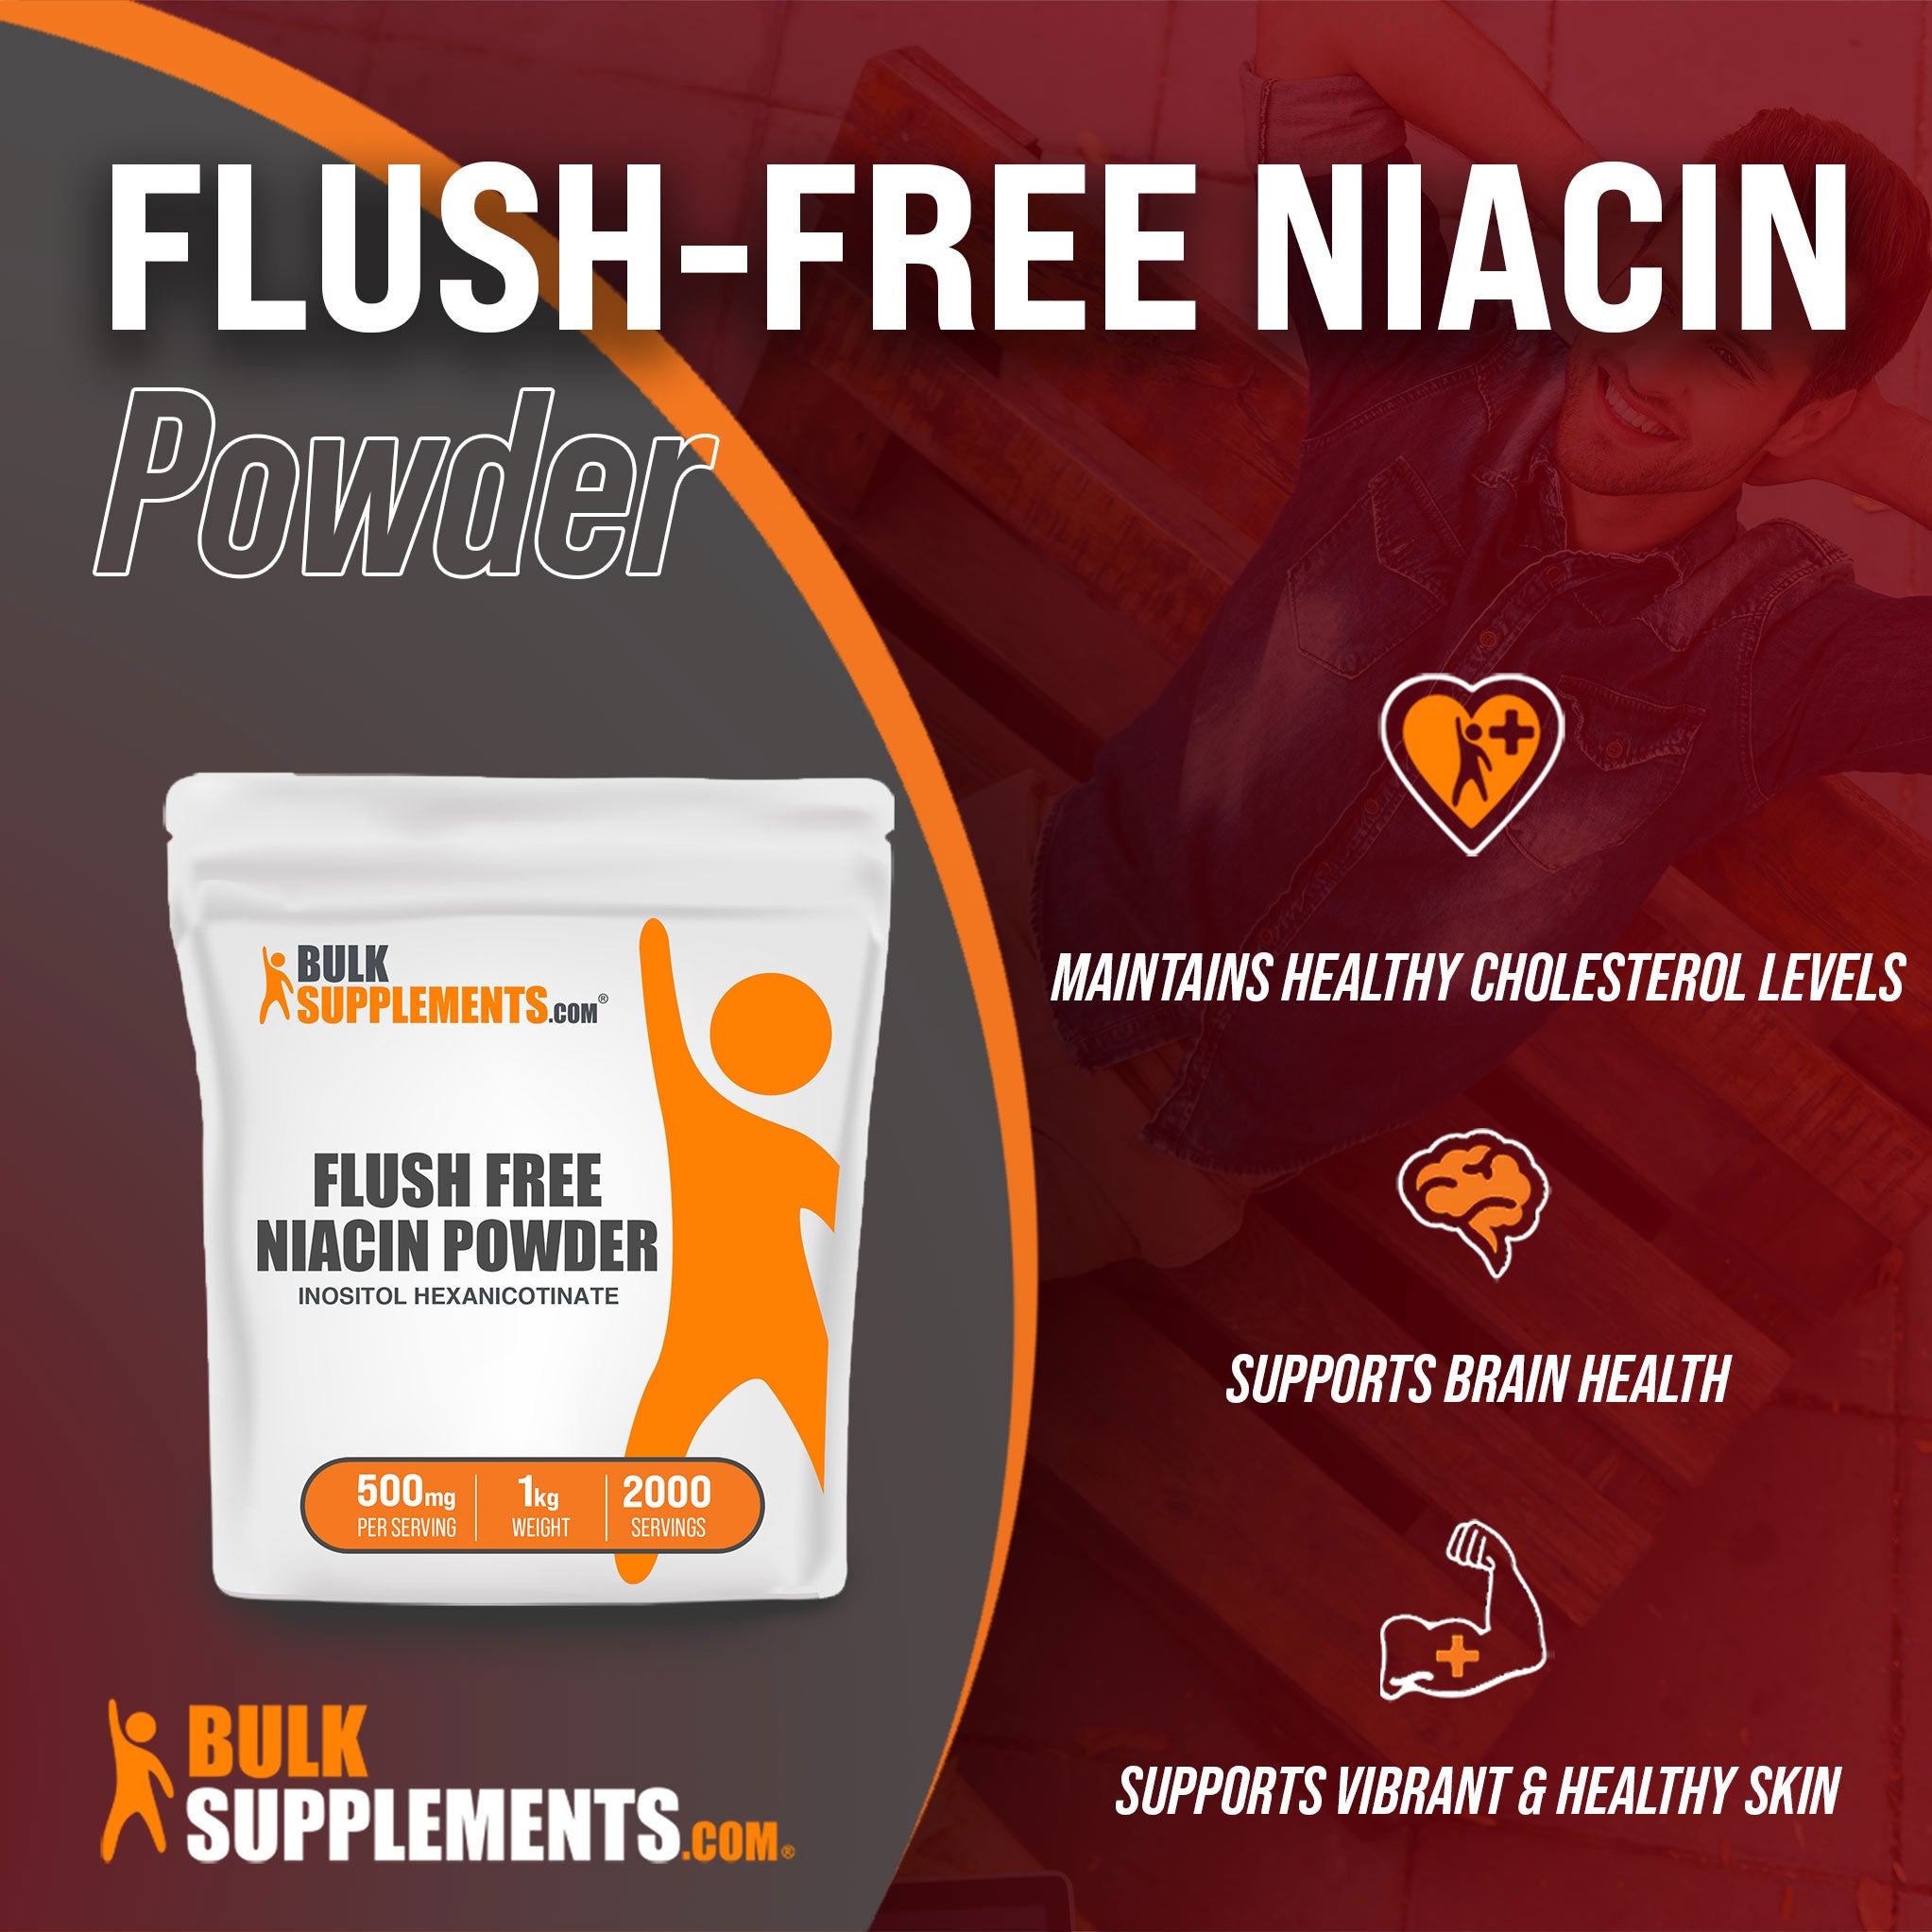 Benefits of Flush-Free Niacin; maintains healthy cholesterol levels, supports brain health, supports vibrant and healthy skin